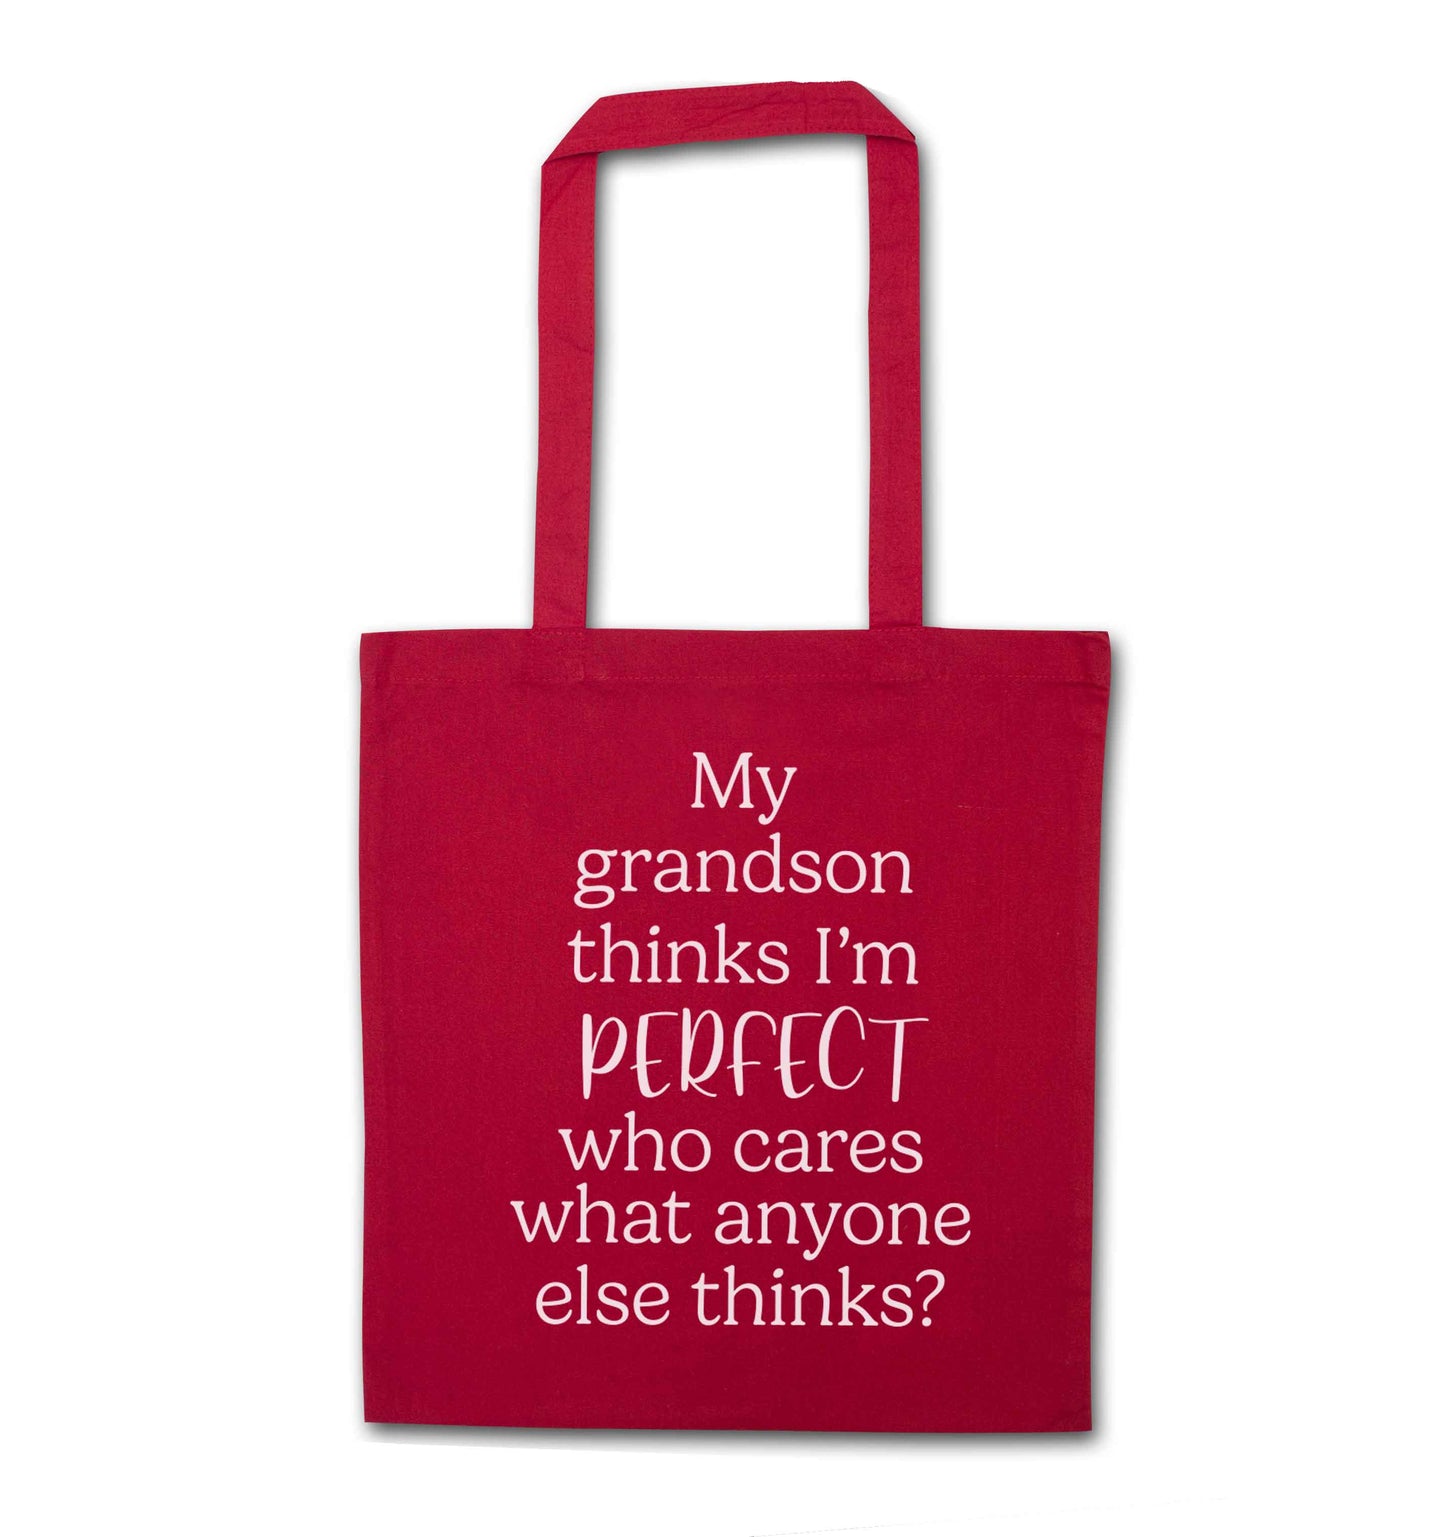 My grandson thinks I'm perfect red tote bag